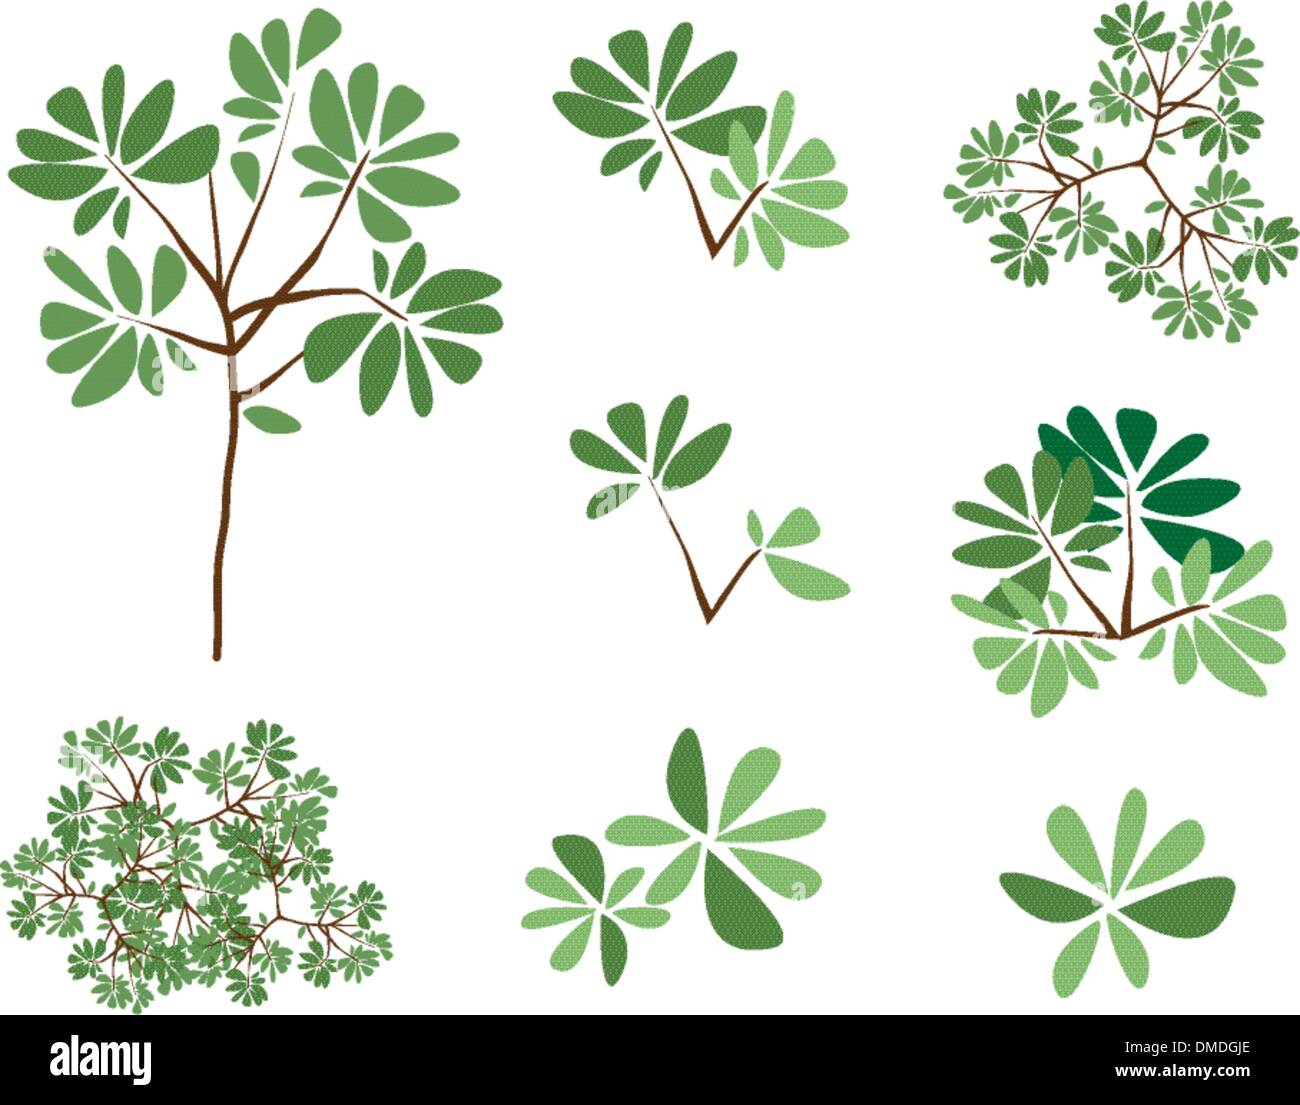 A Set of Isometric Green Trees and Plants Stock Vector